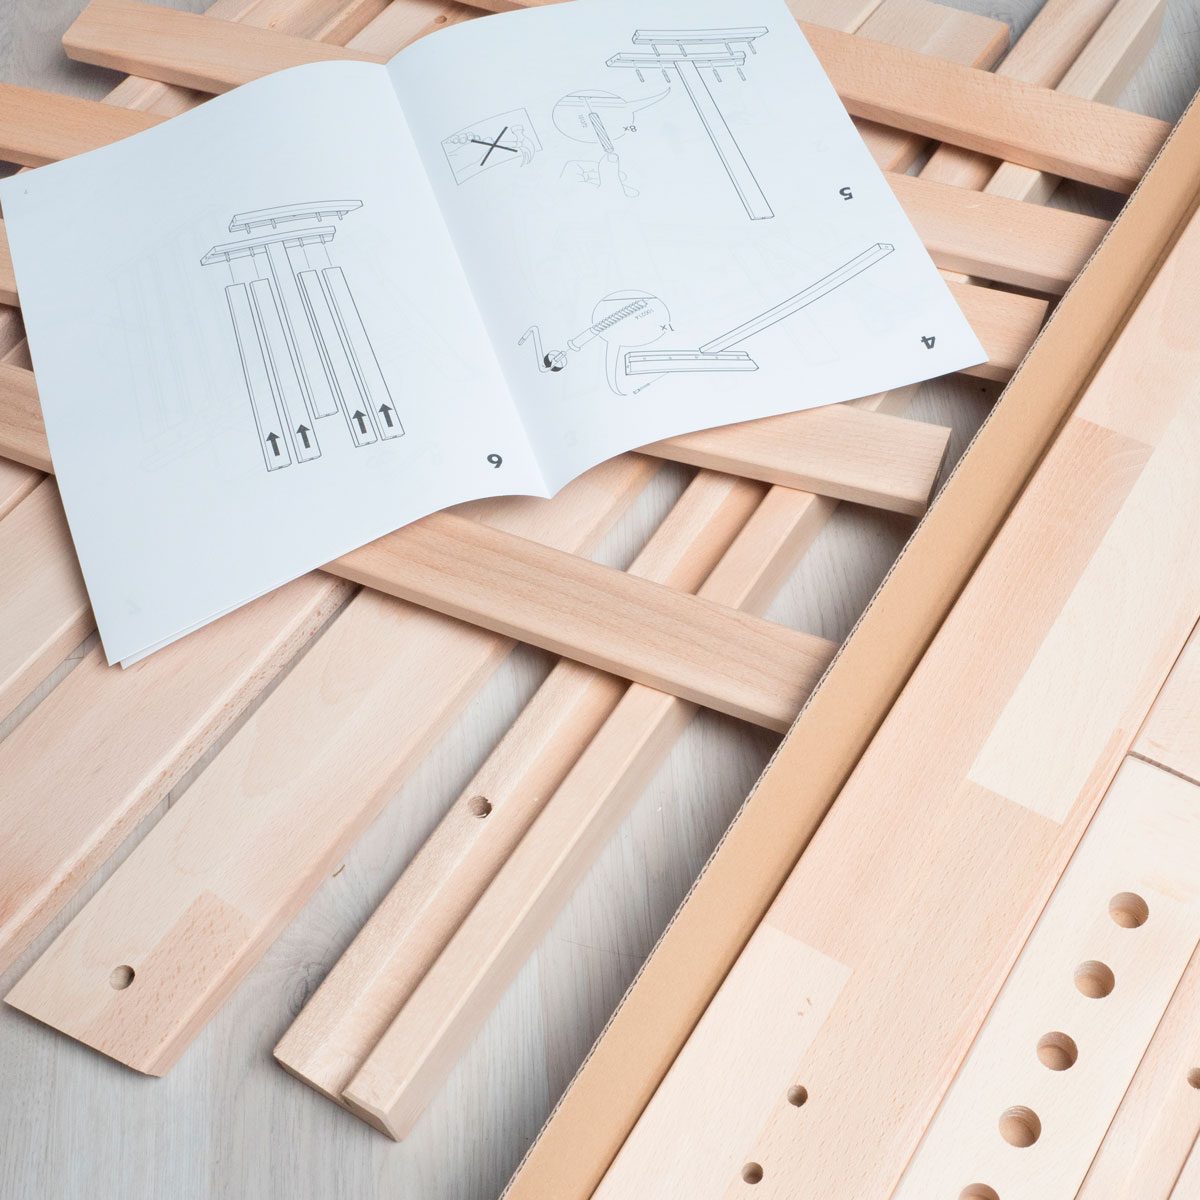 How to Assemble IKEA Furniture Faster, According to a Taskrabbit